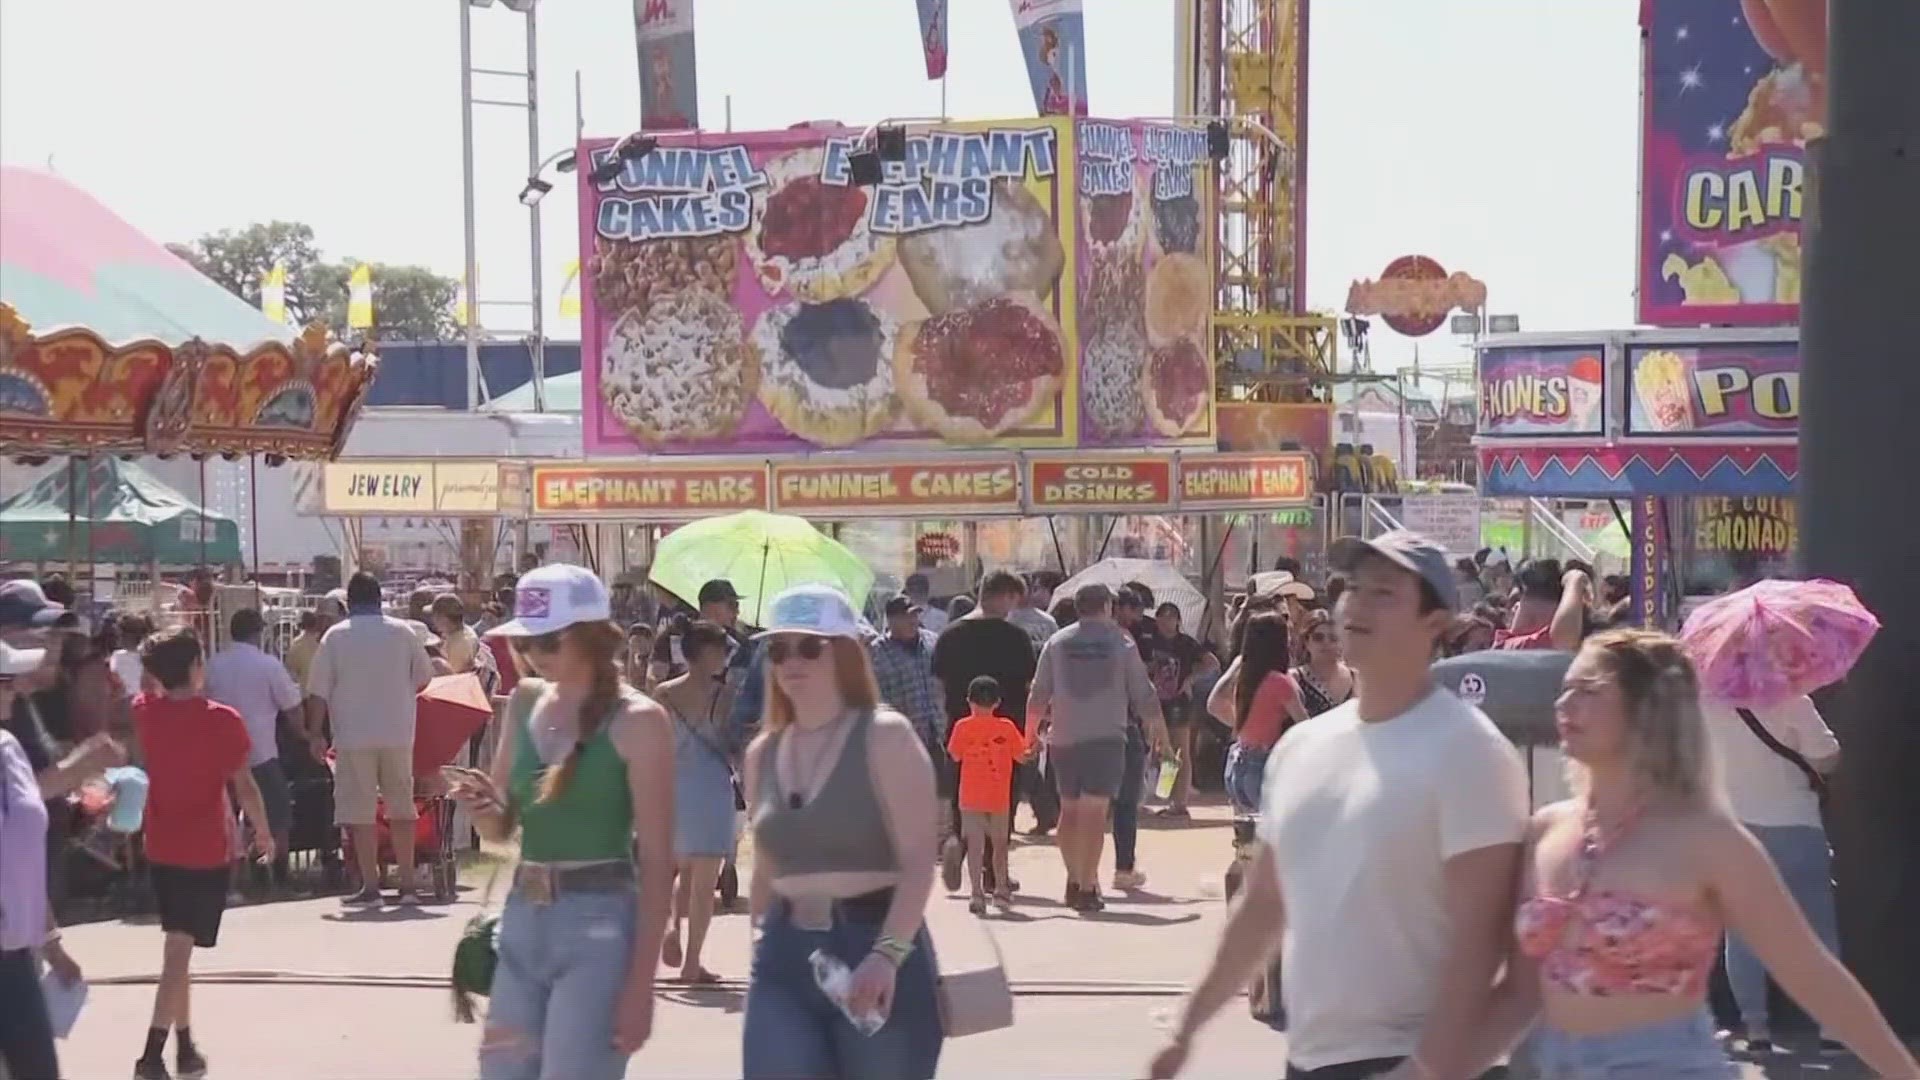 The festival is celebrating its 77th year. You can enjoy live music, food, and carnival rides.